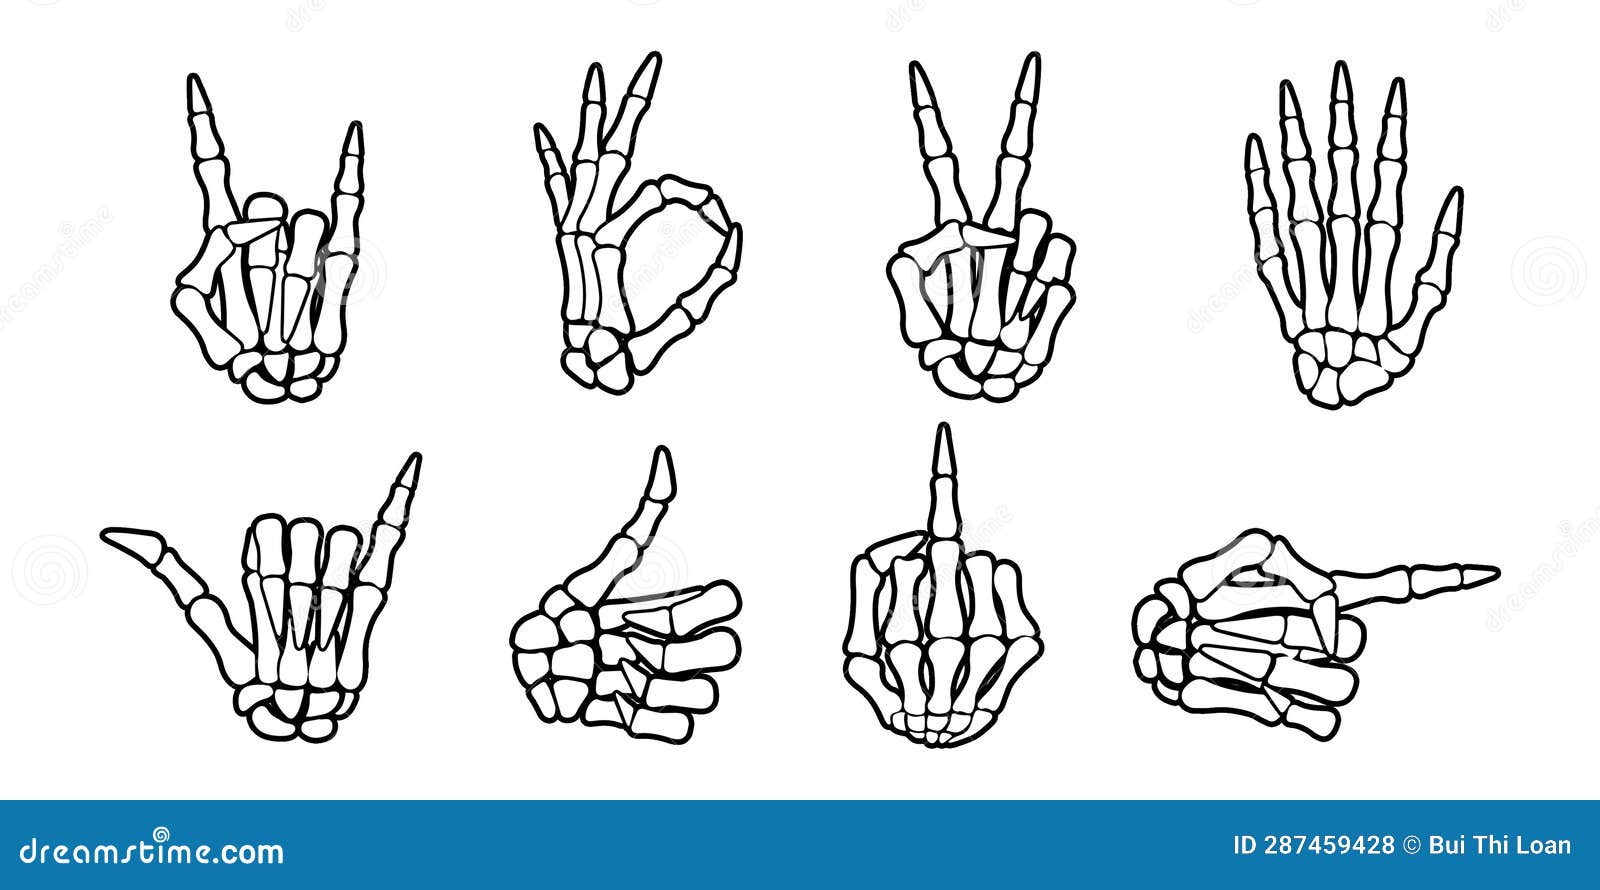 45 Middle Finger Tattoo Ideas To Flip The World